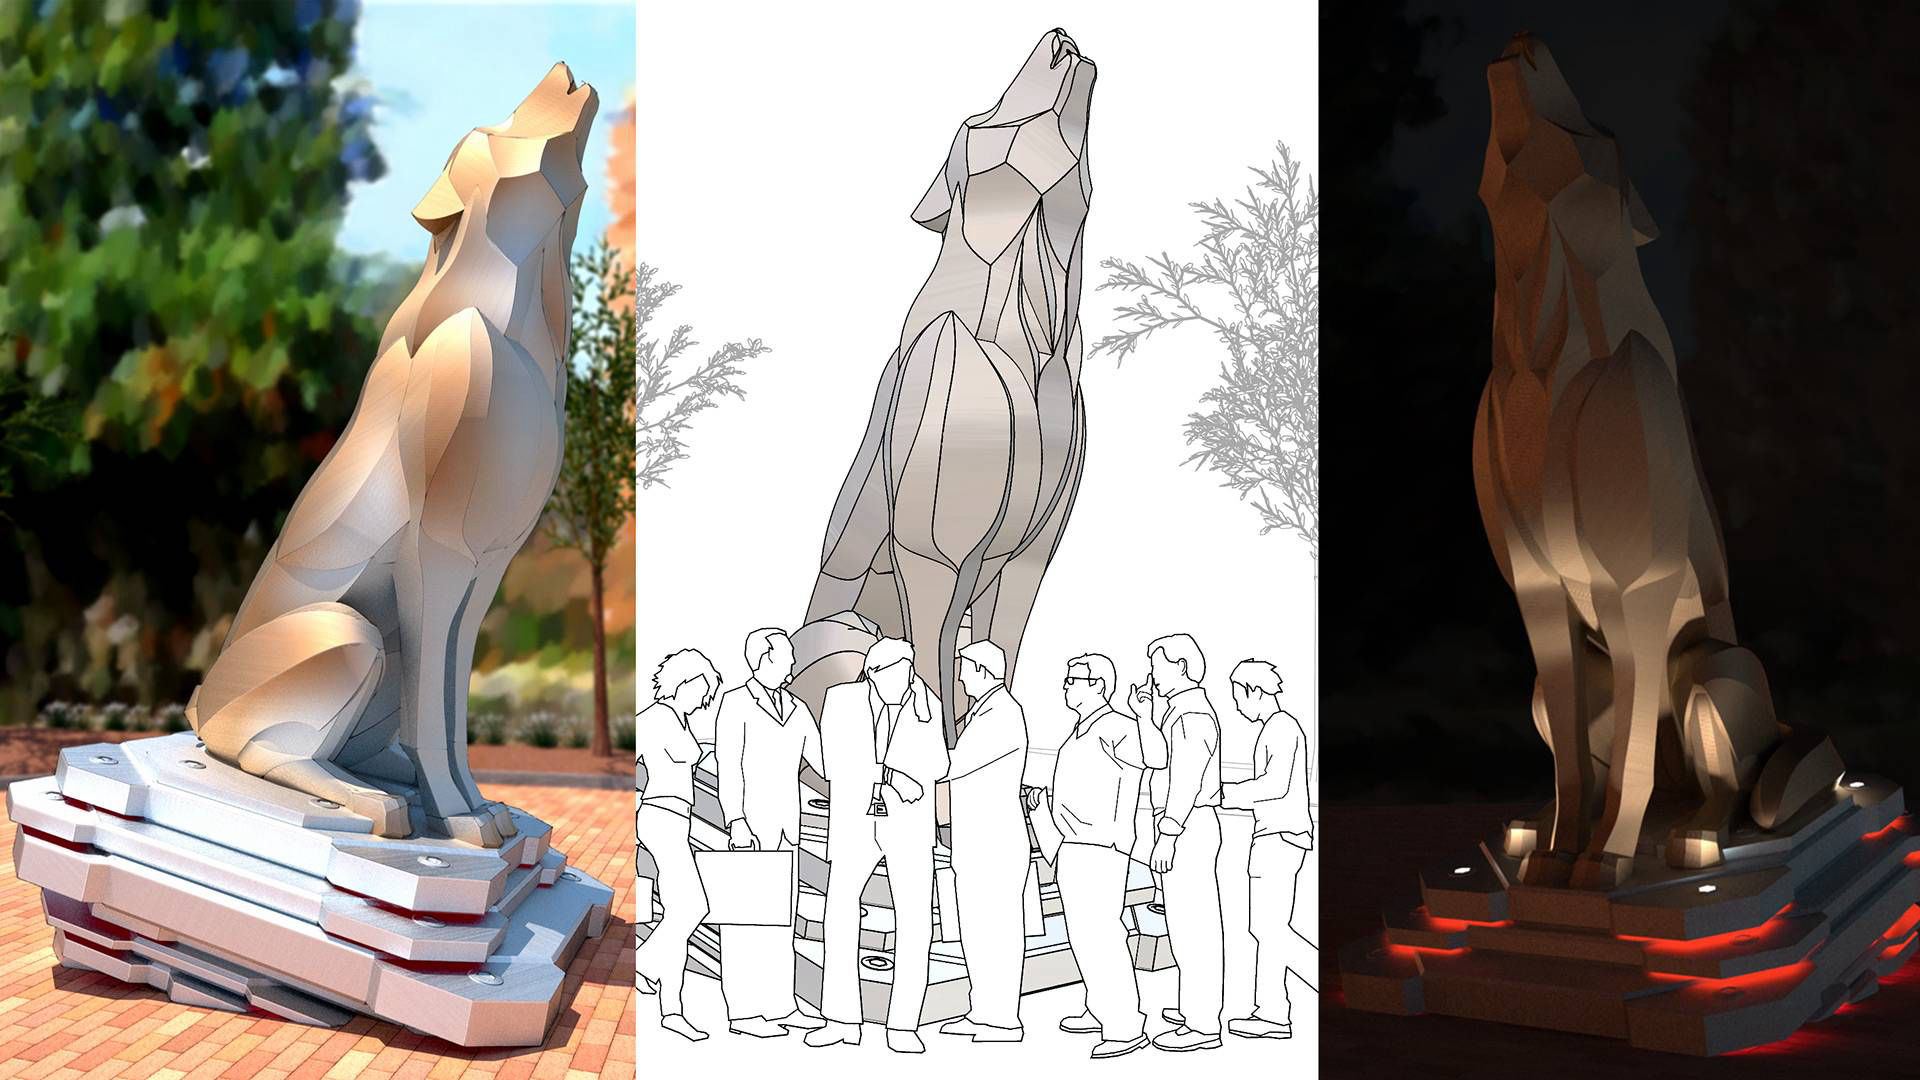 Proposal for public art sculpture by Heath Satow at NCSU in Raleigh, NC